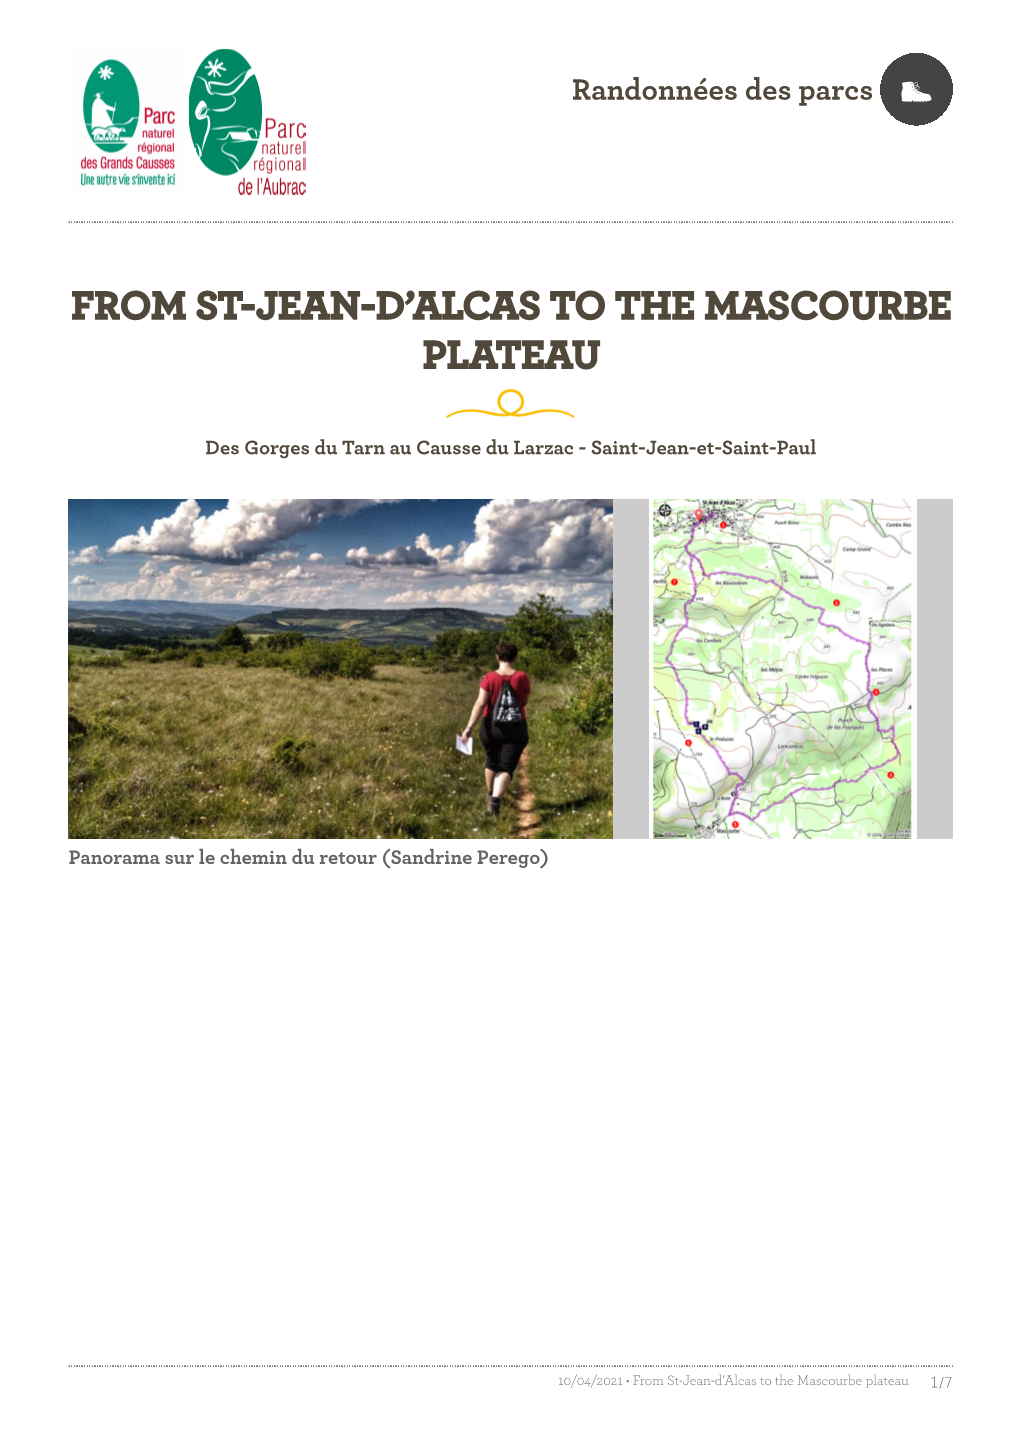 From St-Jean-D'alcas to the Mascourbe Plateau